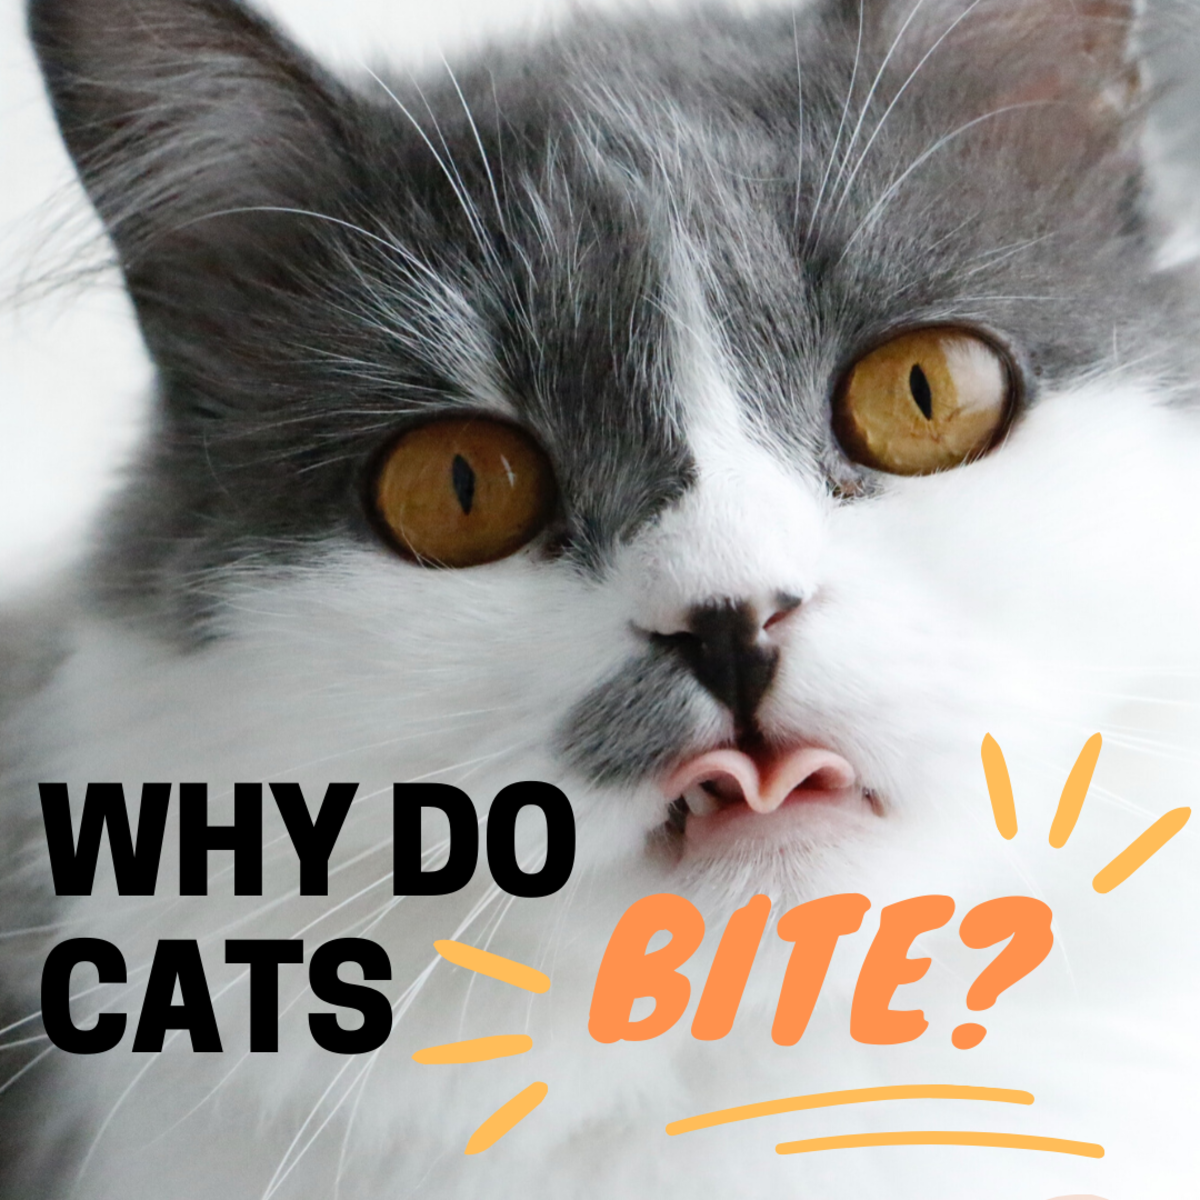 Why Does My Cat Bite Me? Tips for How to Stop It